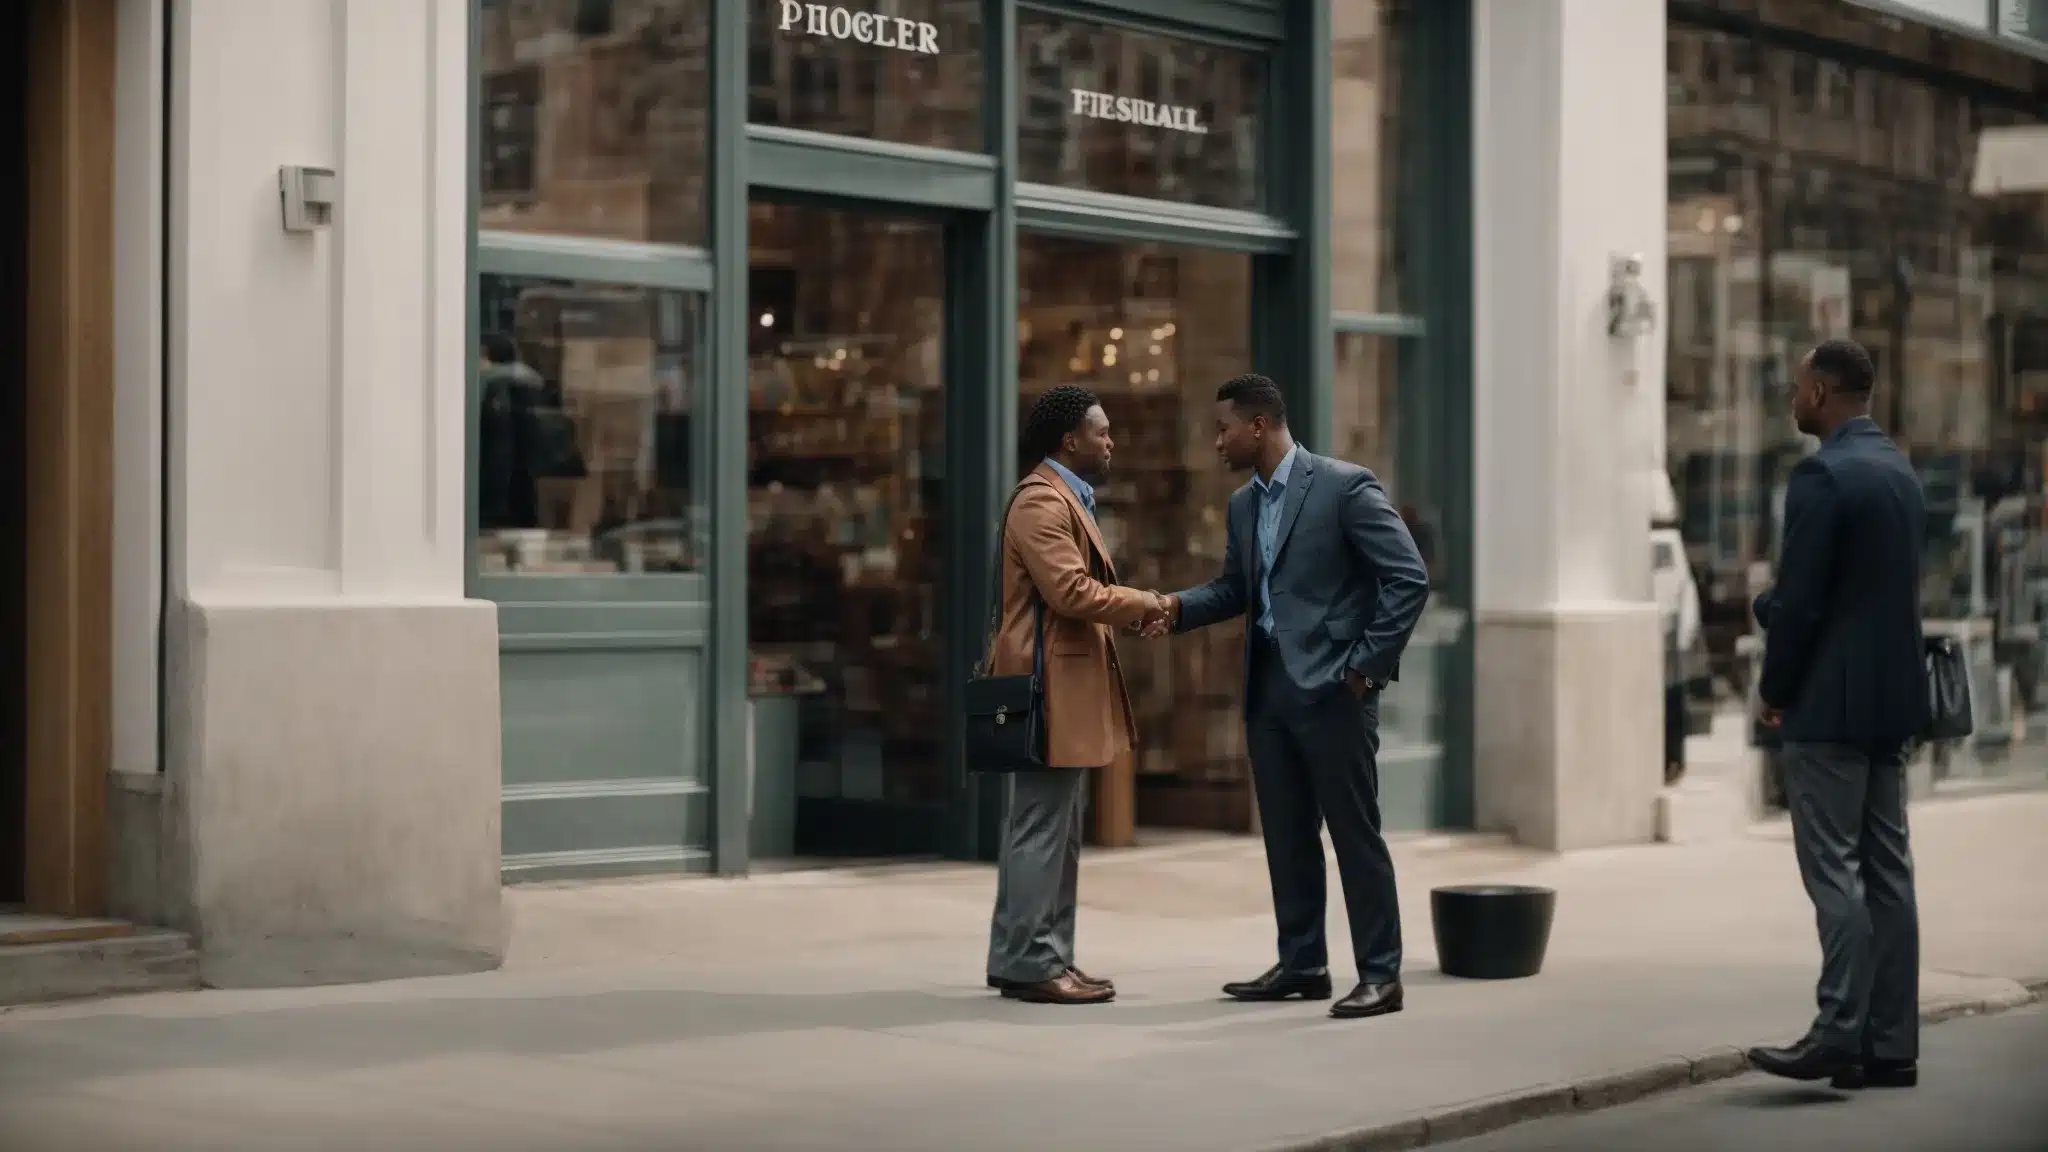 A Person Shaking Hands With A Customer In Front Of A Storefront With A Clearly Displayed, Recognizable Brand Logo.